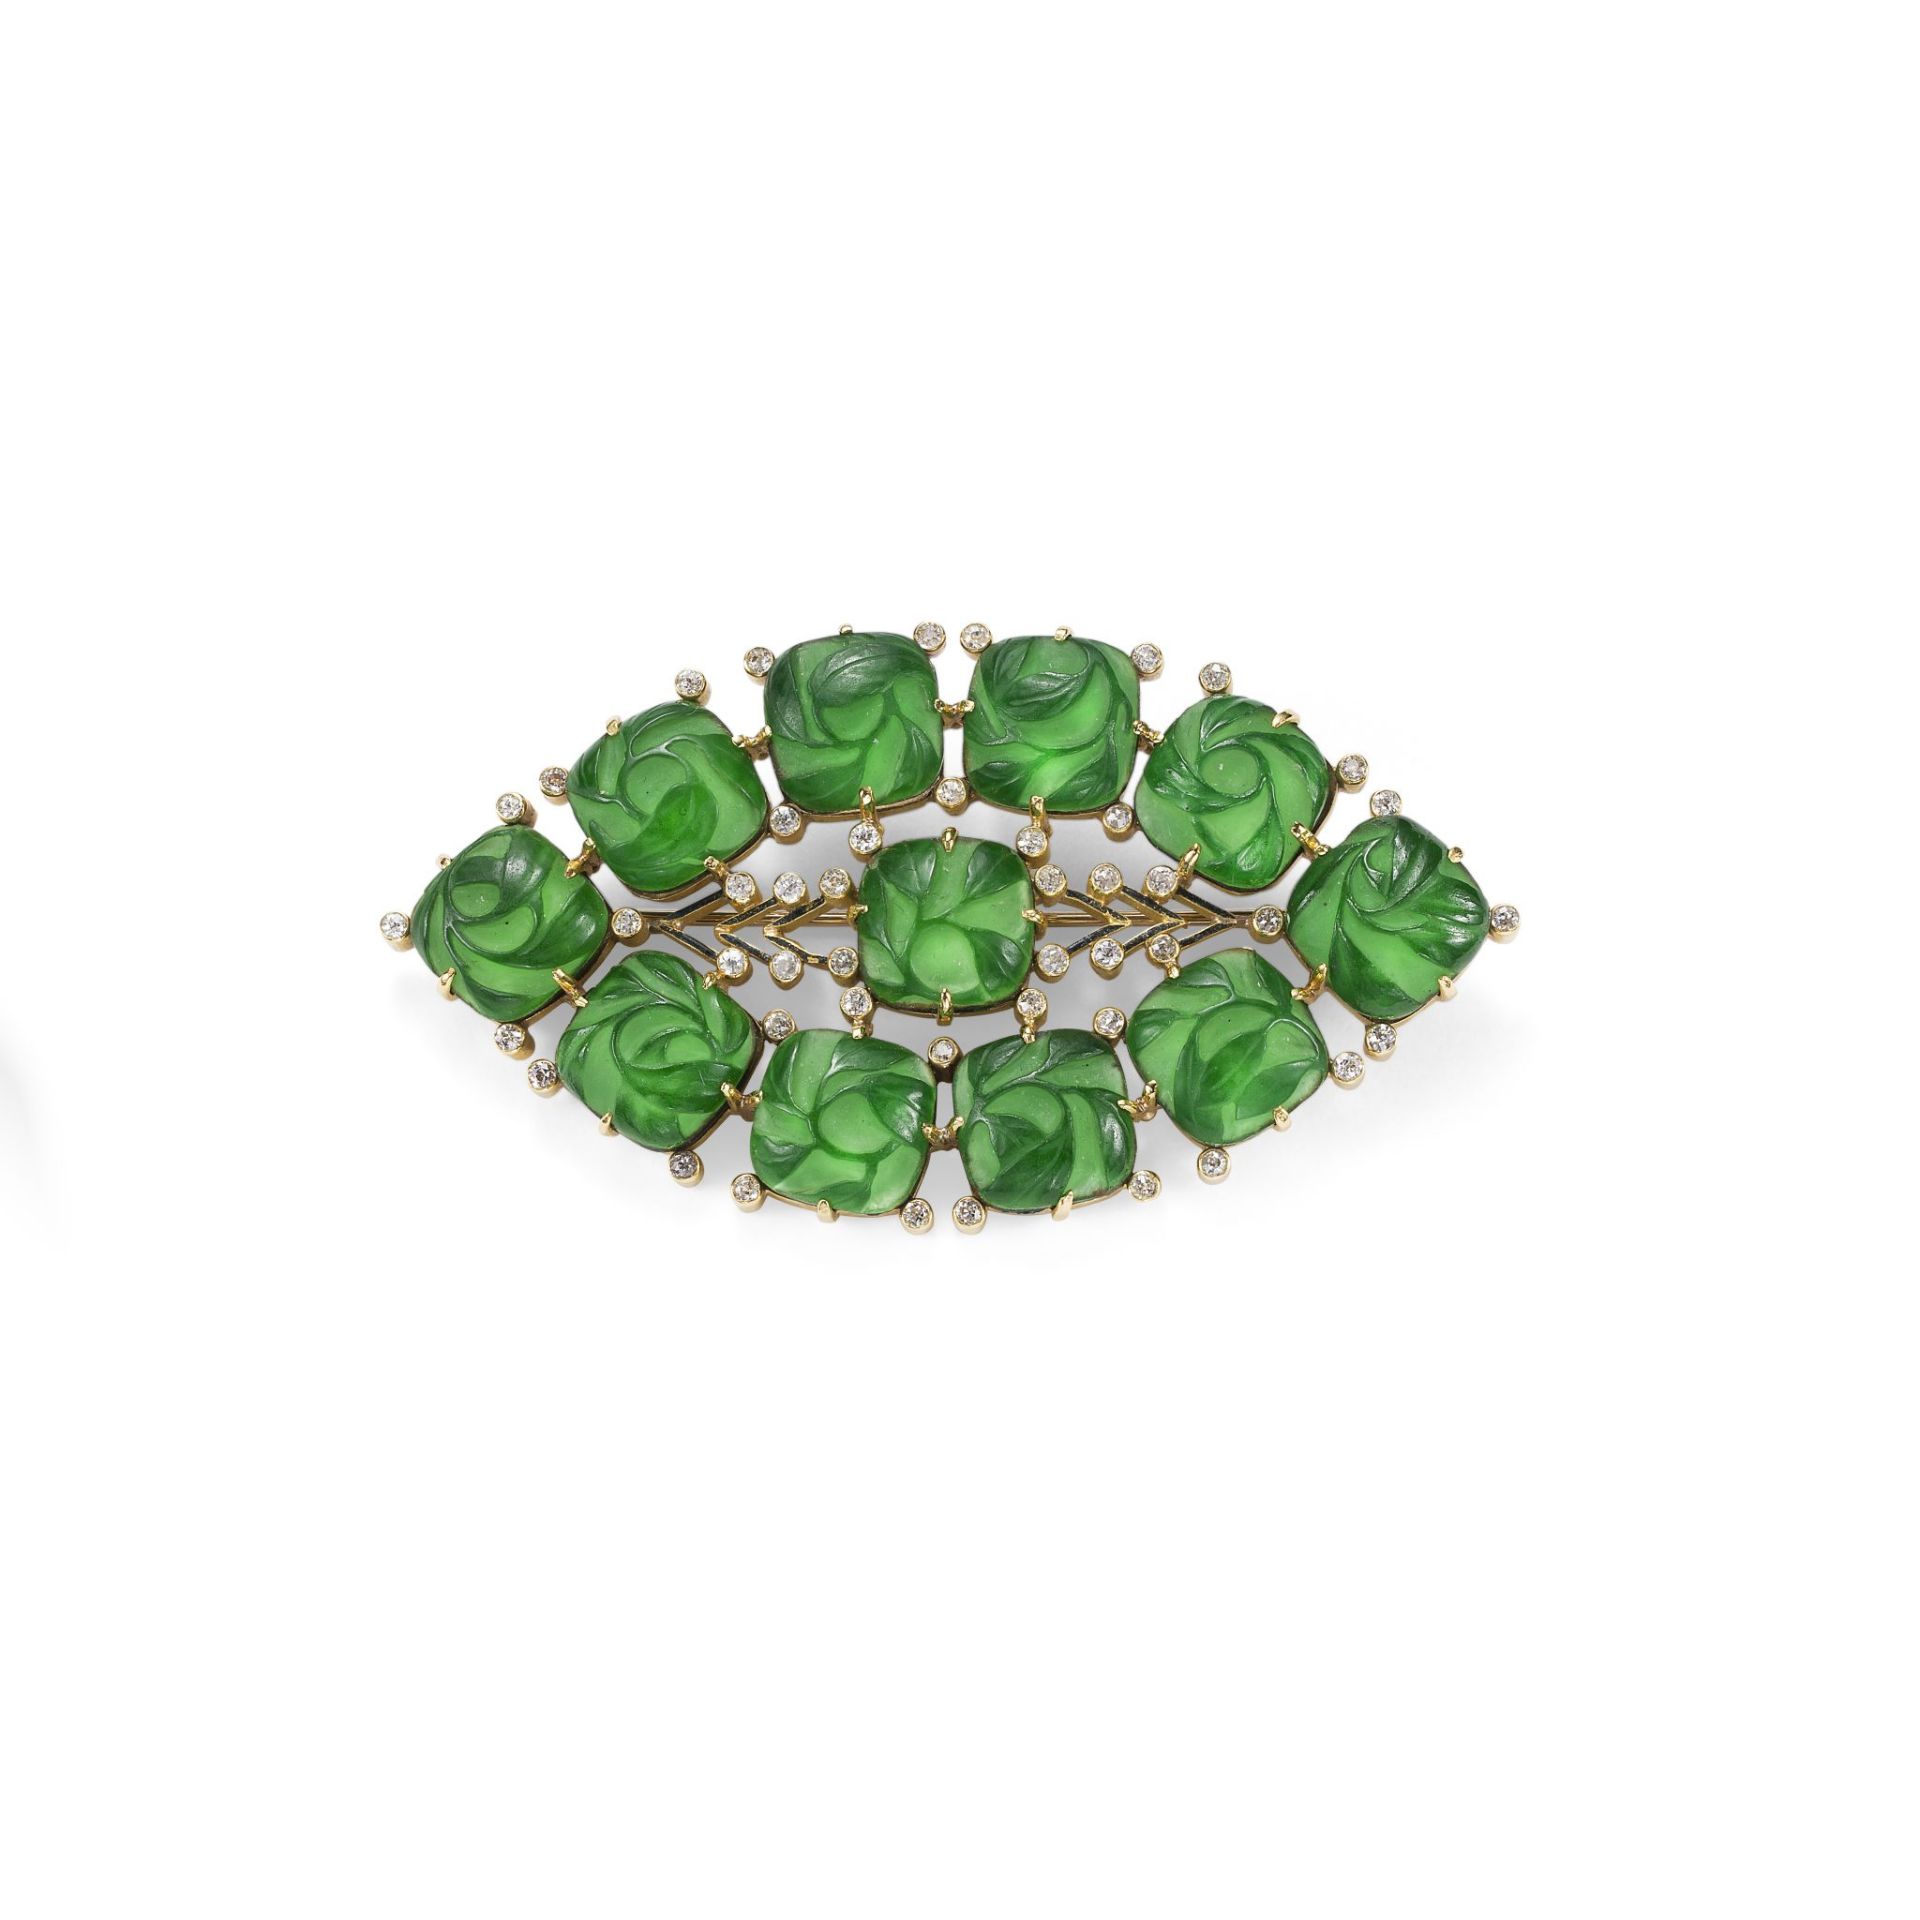 A GLASS, ENAMEL AND DIAMOND BRACELET, BROOCH AND EARRING SUITE, BY LALIQUE, CIRCA 1905-10 - Image 2 of 4